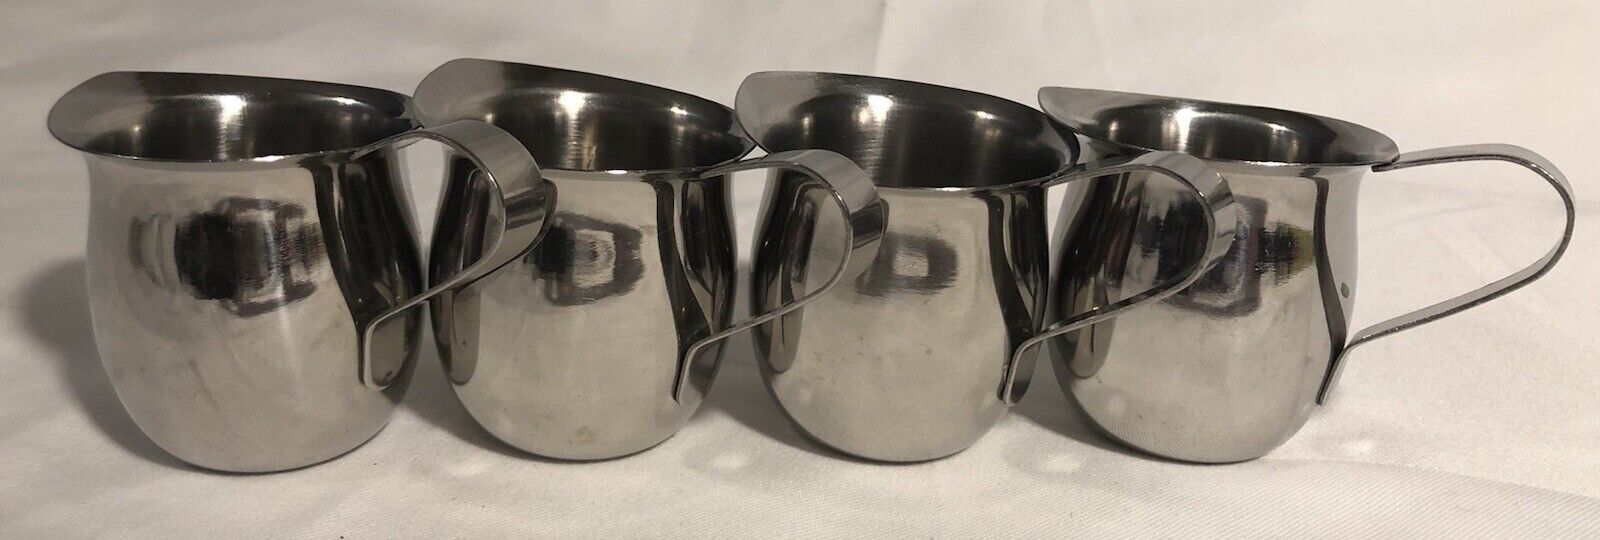 American Metalcraft Stainless Steel Creamer Cup/Pitcher made in India Lot Of 4